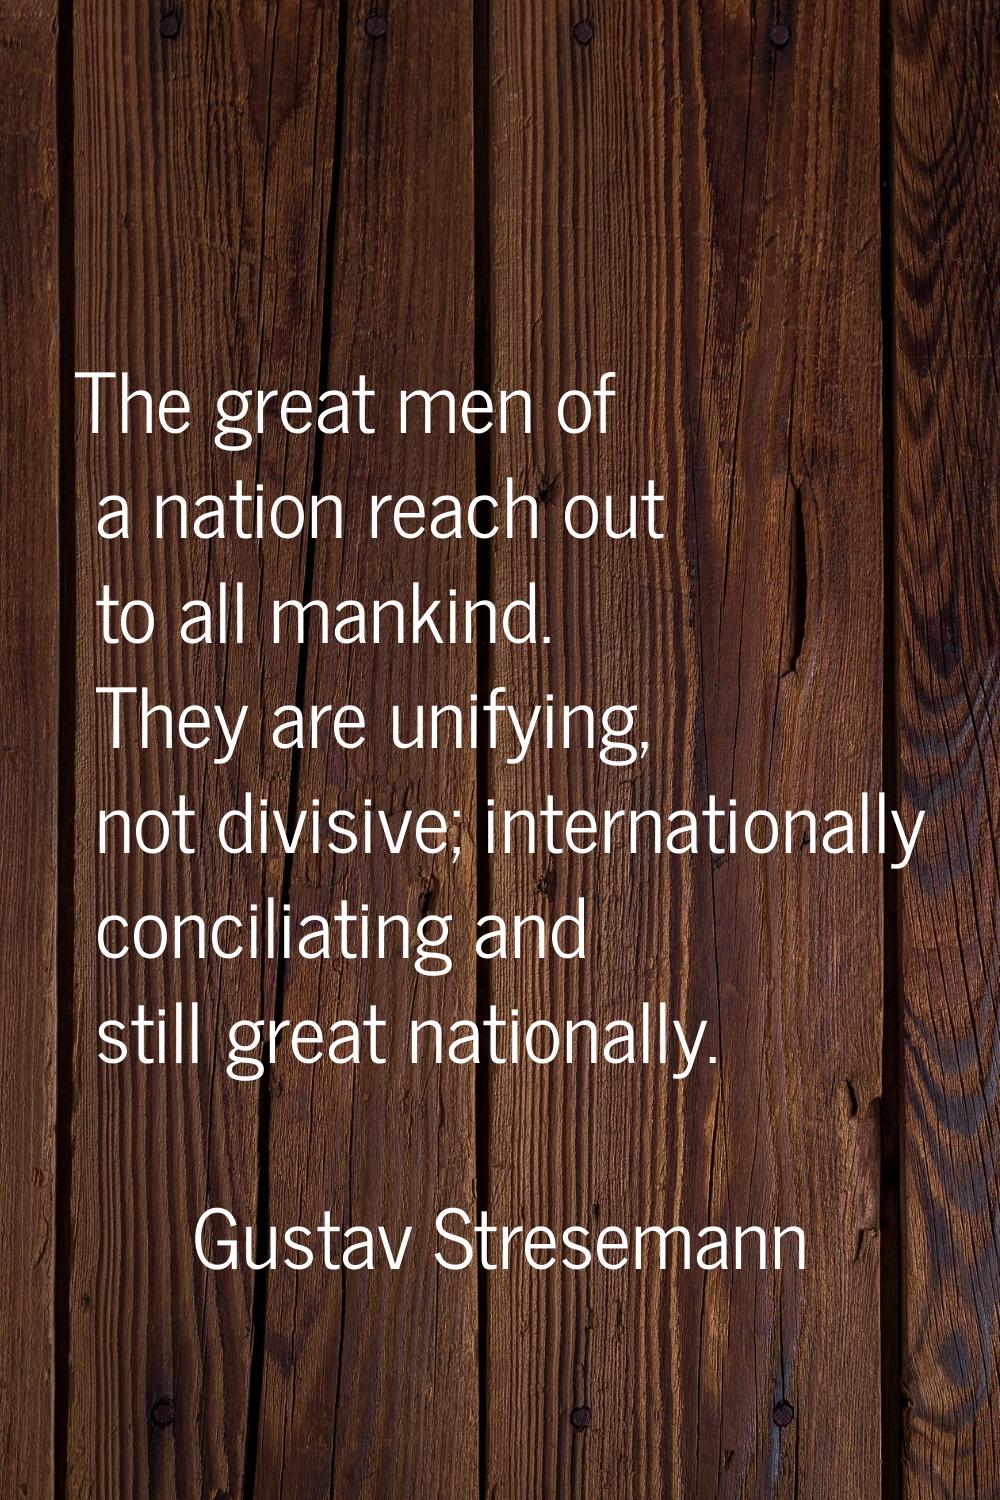 The great men of a nation reach out to all mankind. They are unifying, not divisive; internationall